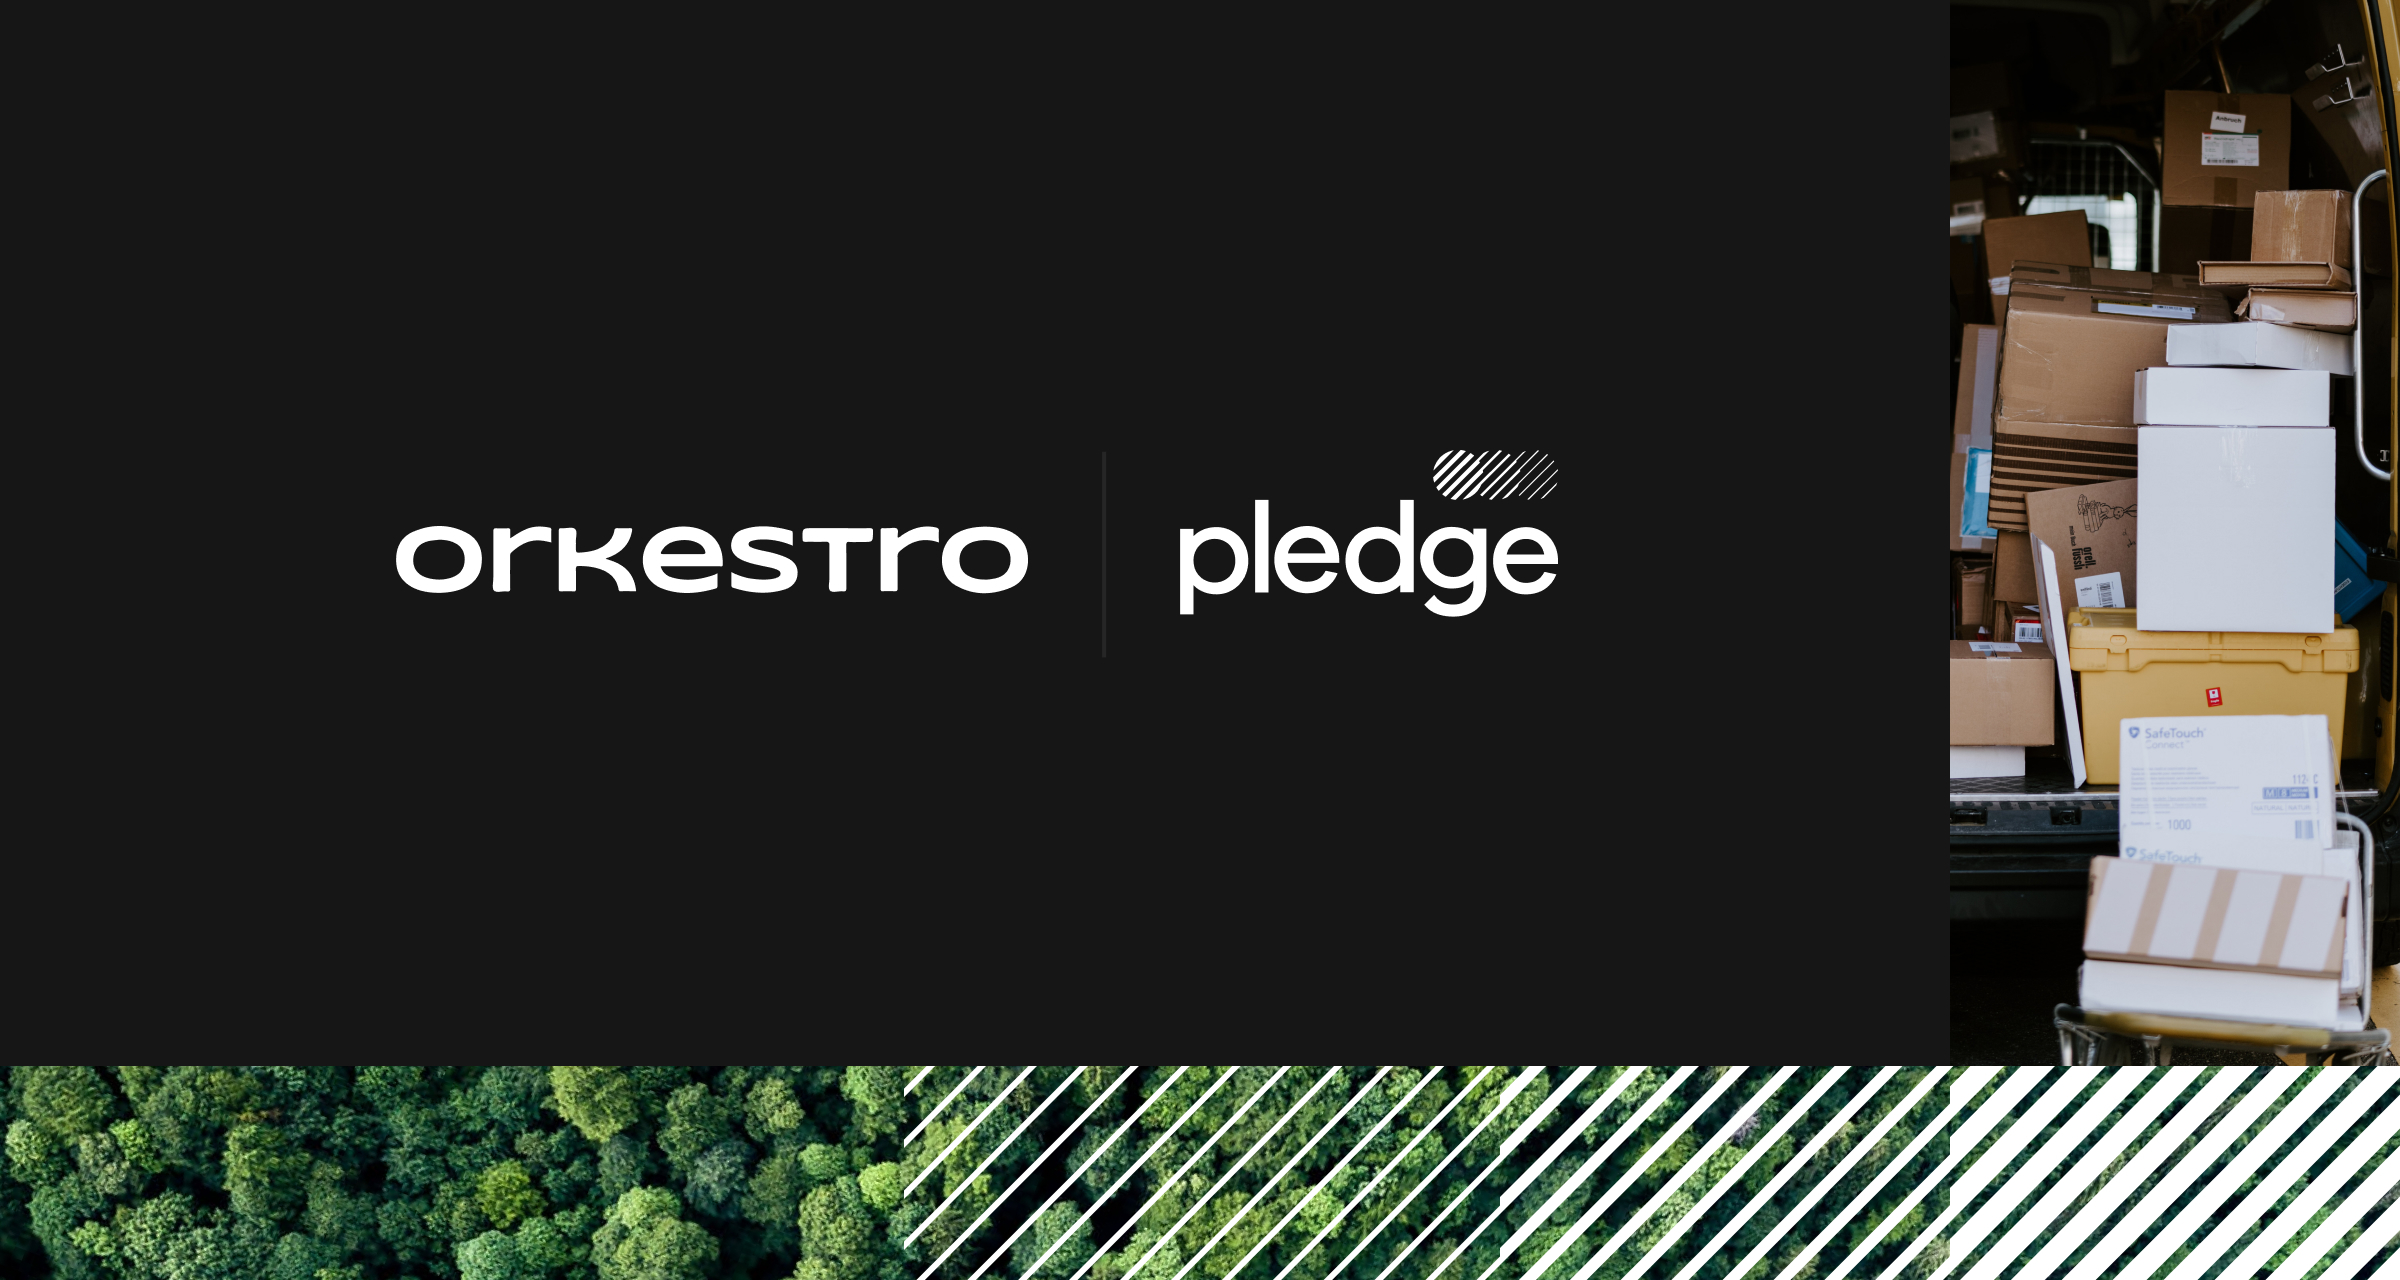 Last-mile delivery infrastructure player Orkestro partners with Pledge to take climate action on the impact of their deliveries